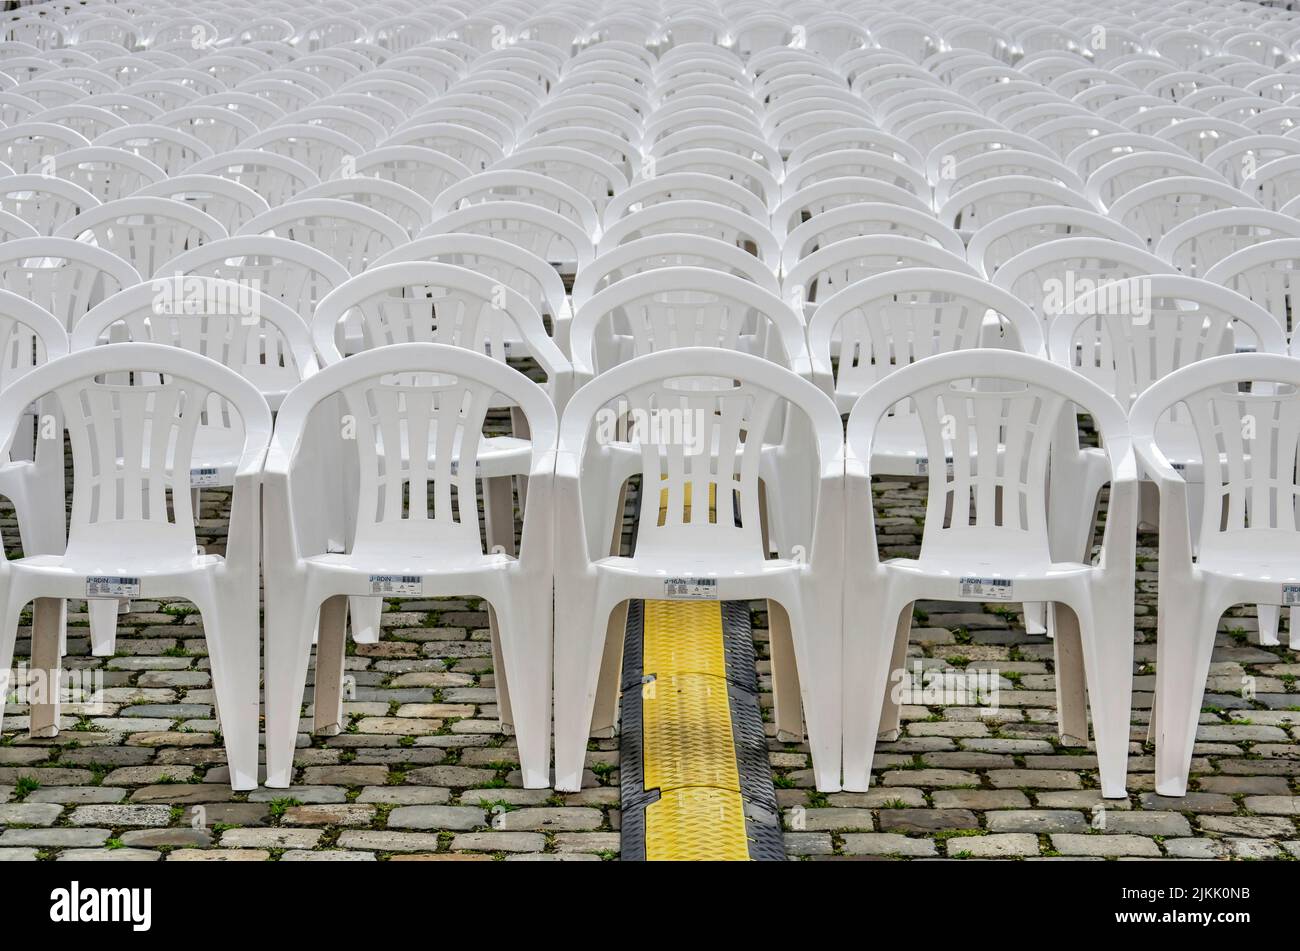 Rows of white plastic chairs on a cobblestone pavement with a cable tray Stock Photo